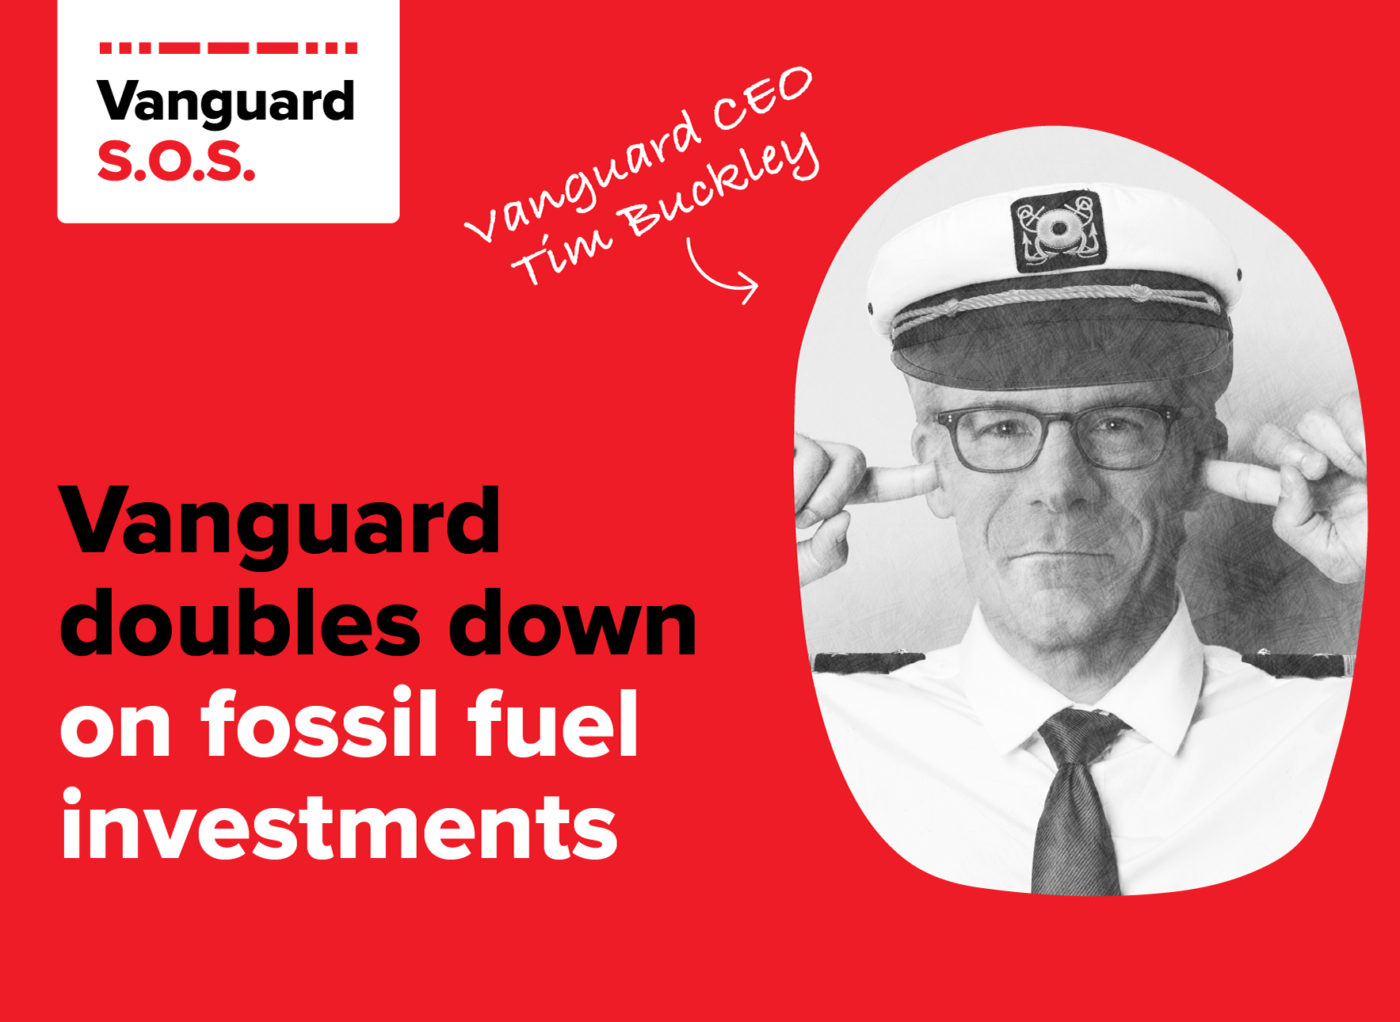 An image of Vanguard CEO Tim Buckley in a captain's hat with his fingers in his ears. The text beside it reads "Vanguard doubles down on fossil fuel investments"